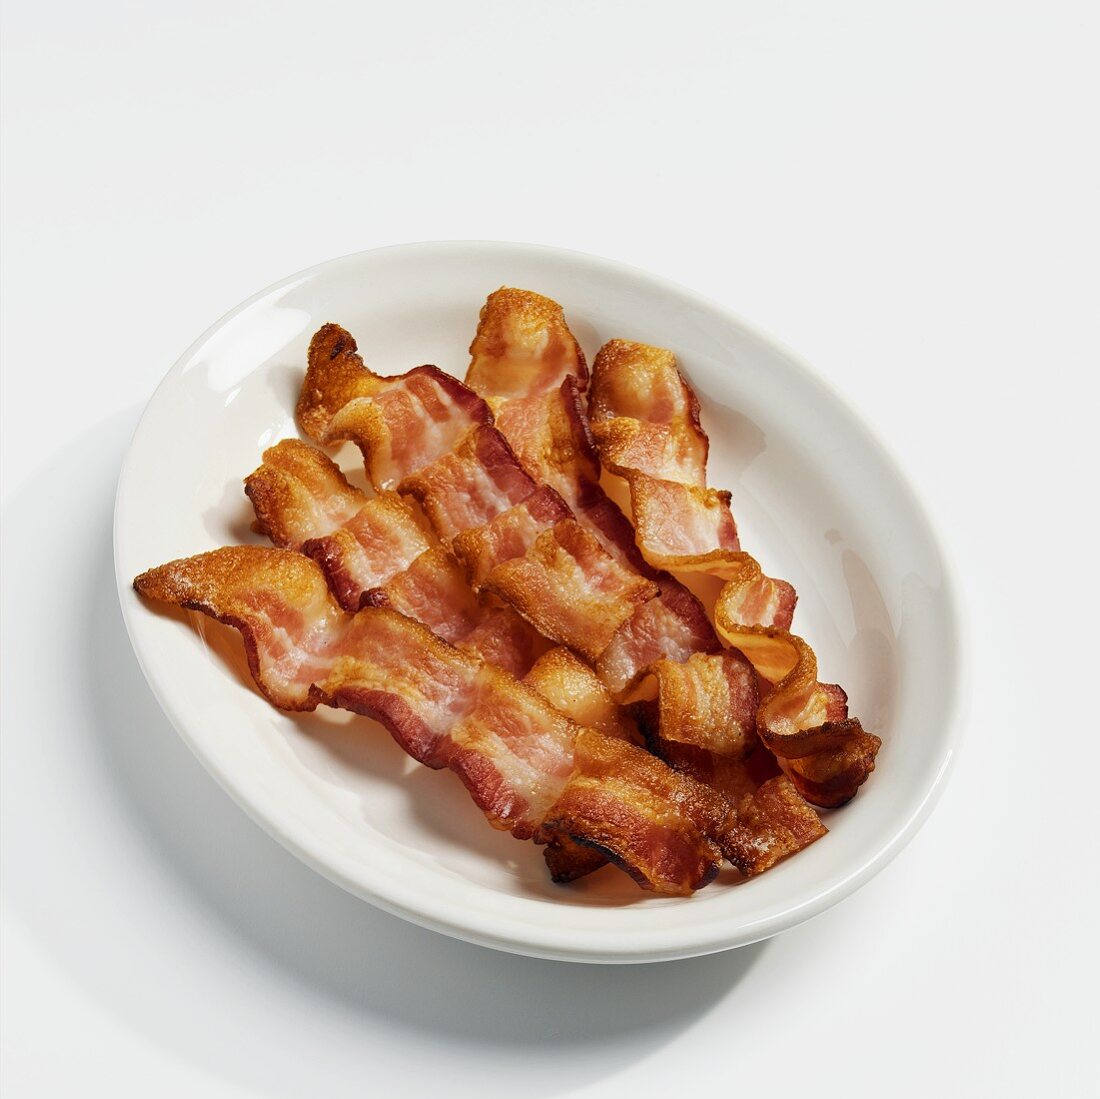 Five Strips of Bacon on a White Plate